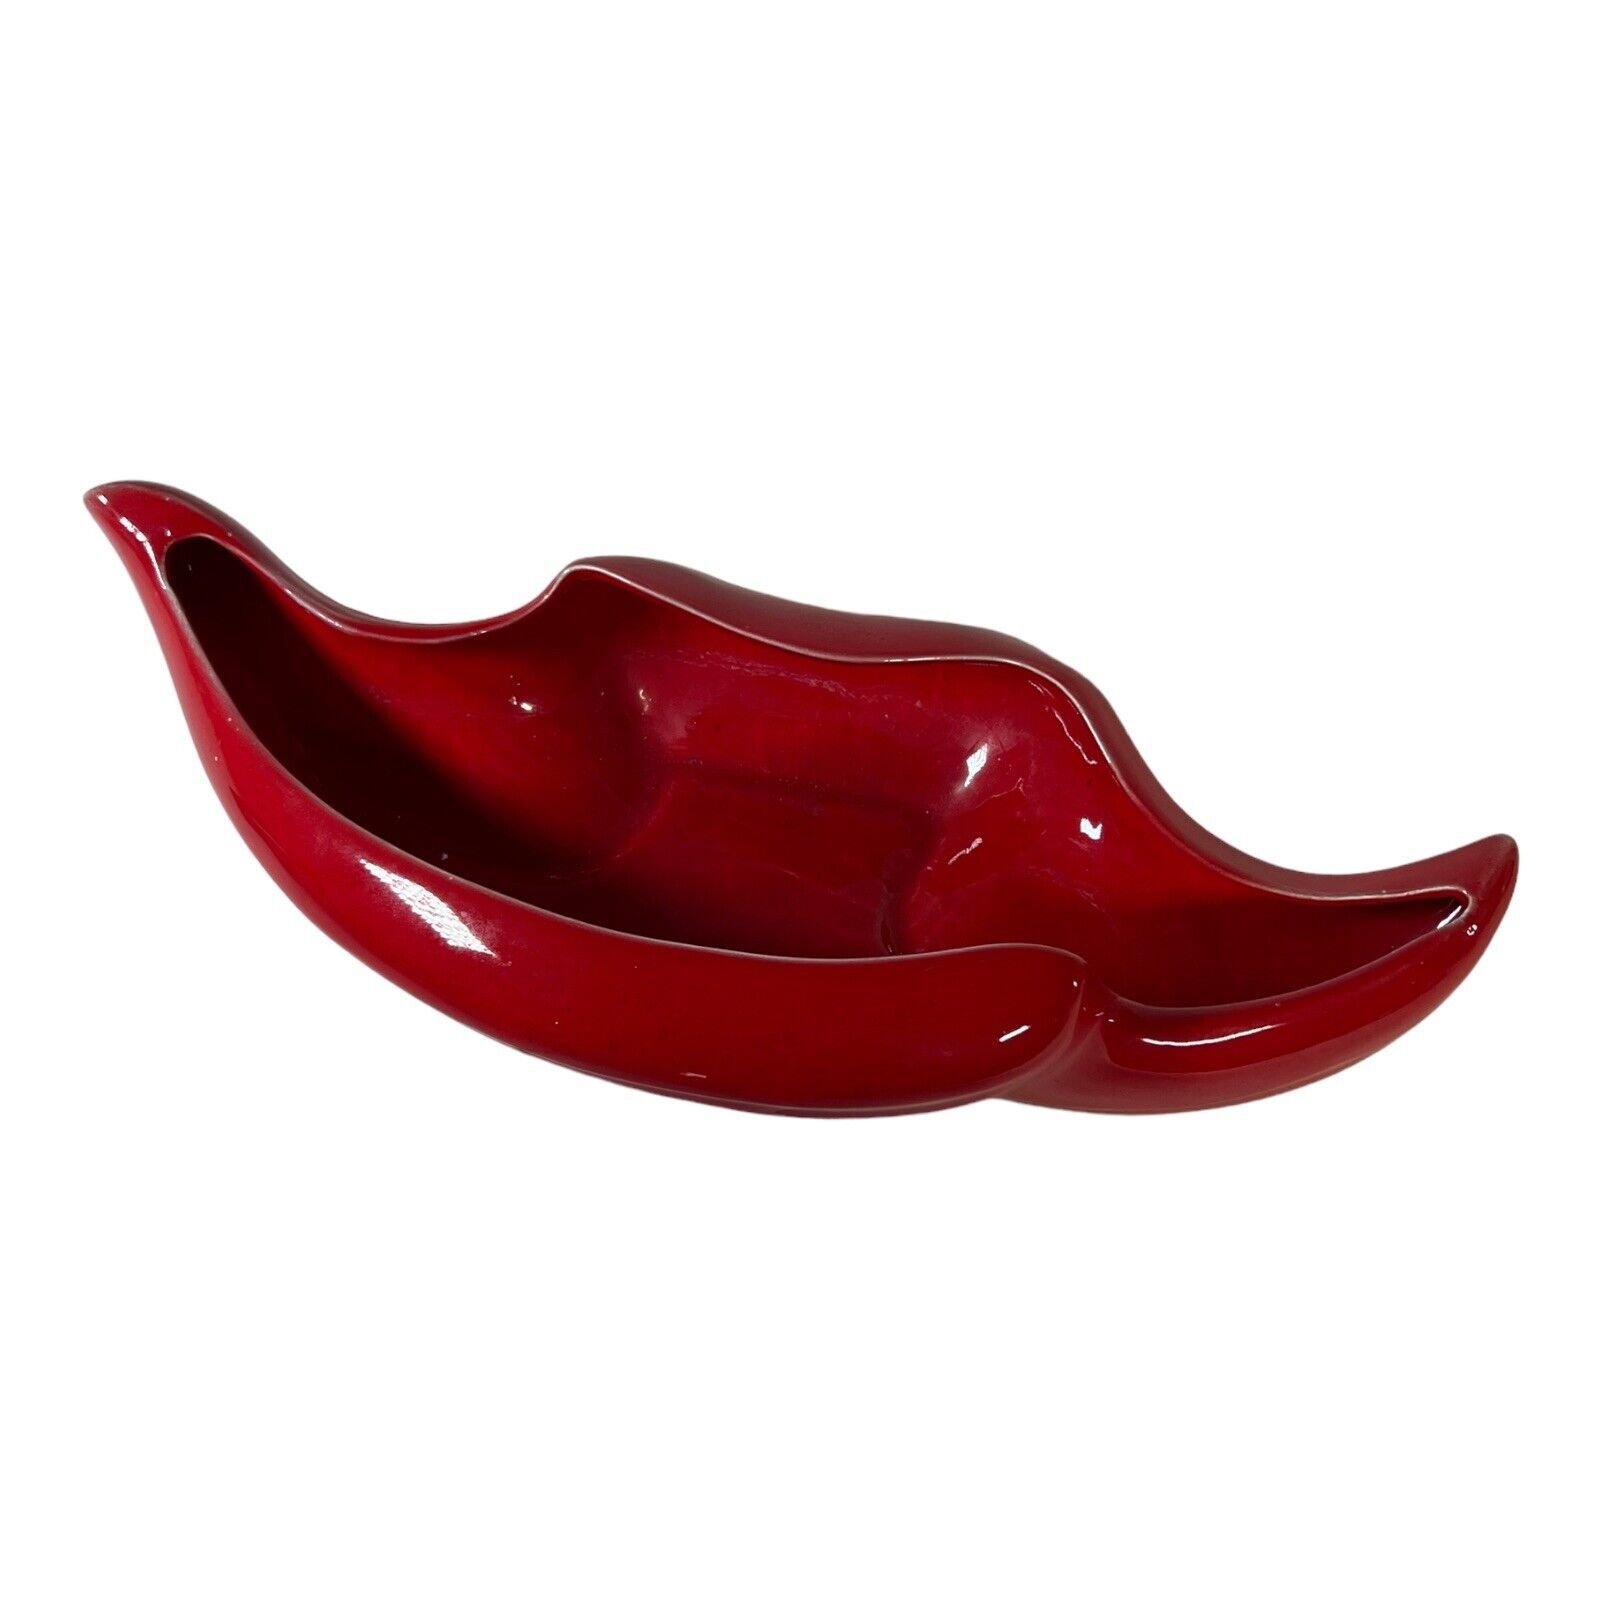 Vintage California Pottery Console Red Bowl Planter Lips Odd Smile MCM 16" - $42.53